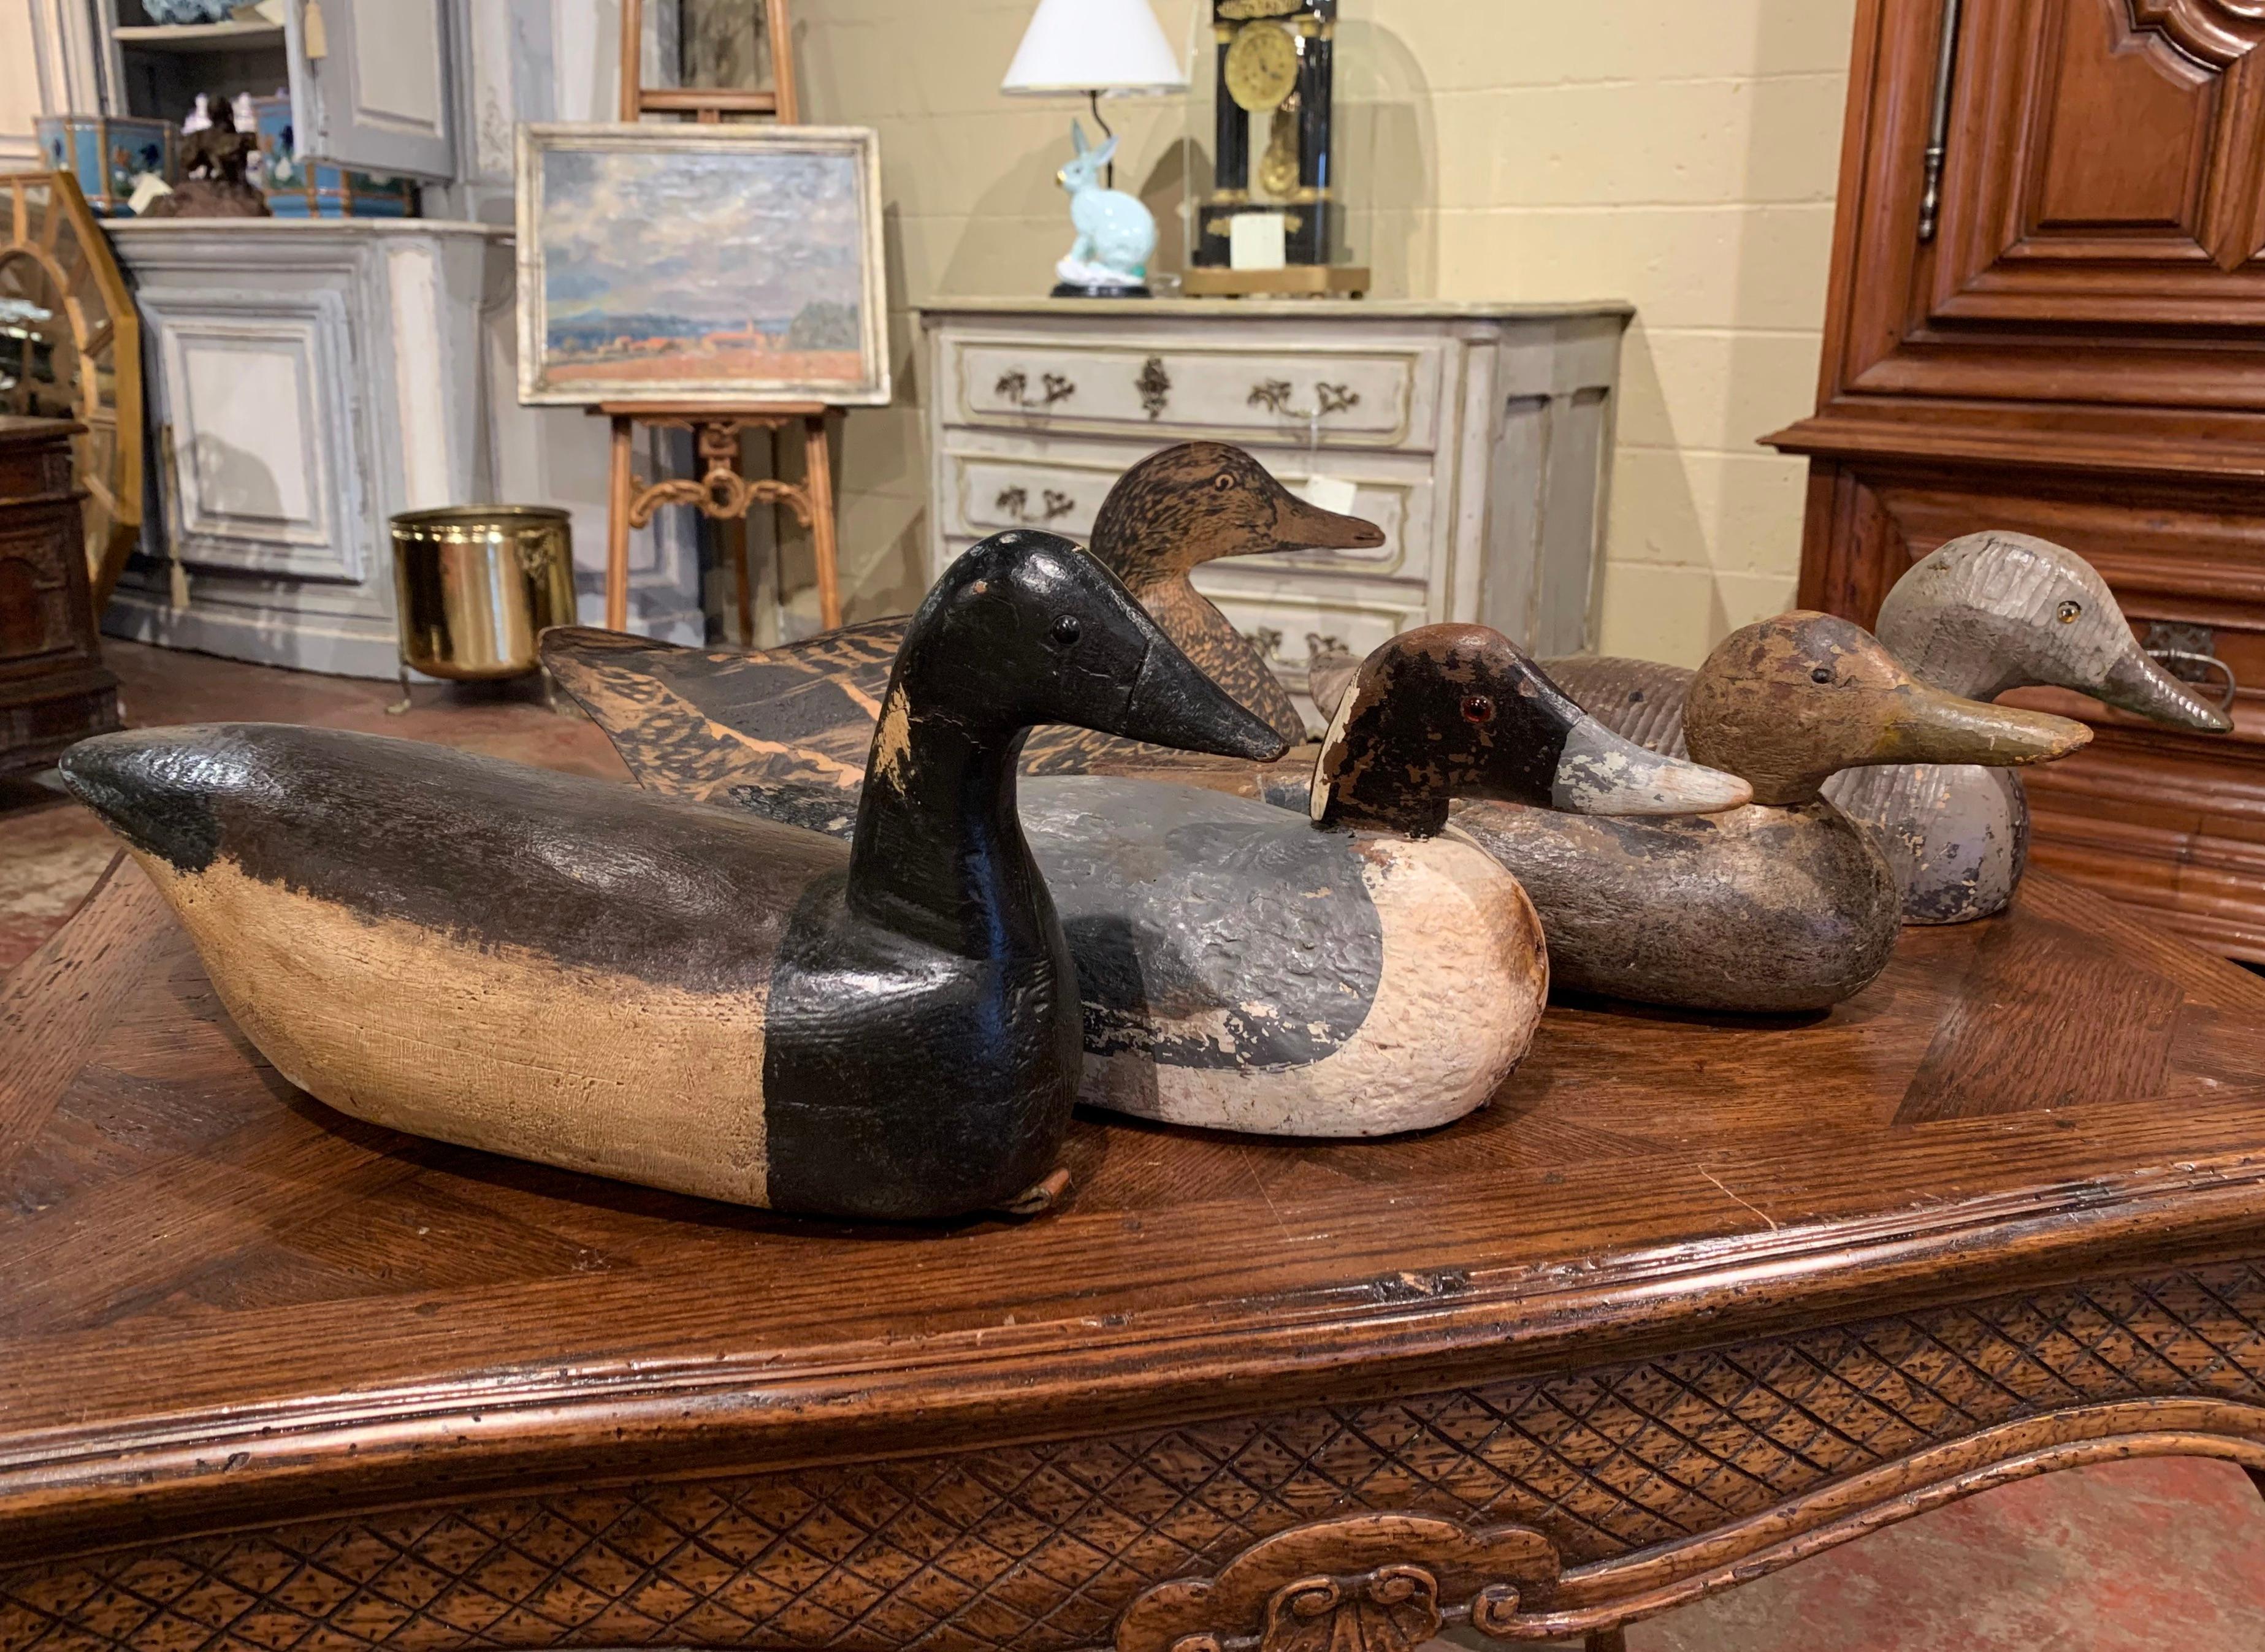 Crafted circa 1920-1940, the 5 vintage wood and fiberglass duck decoys are of varied sizes and species; each hand carved sculpture has remnants of worn paint. One bird includes a Wm. R. Johnson's folding fiberboard decoy, Seattle, Washington,